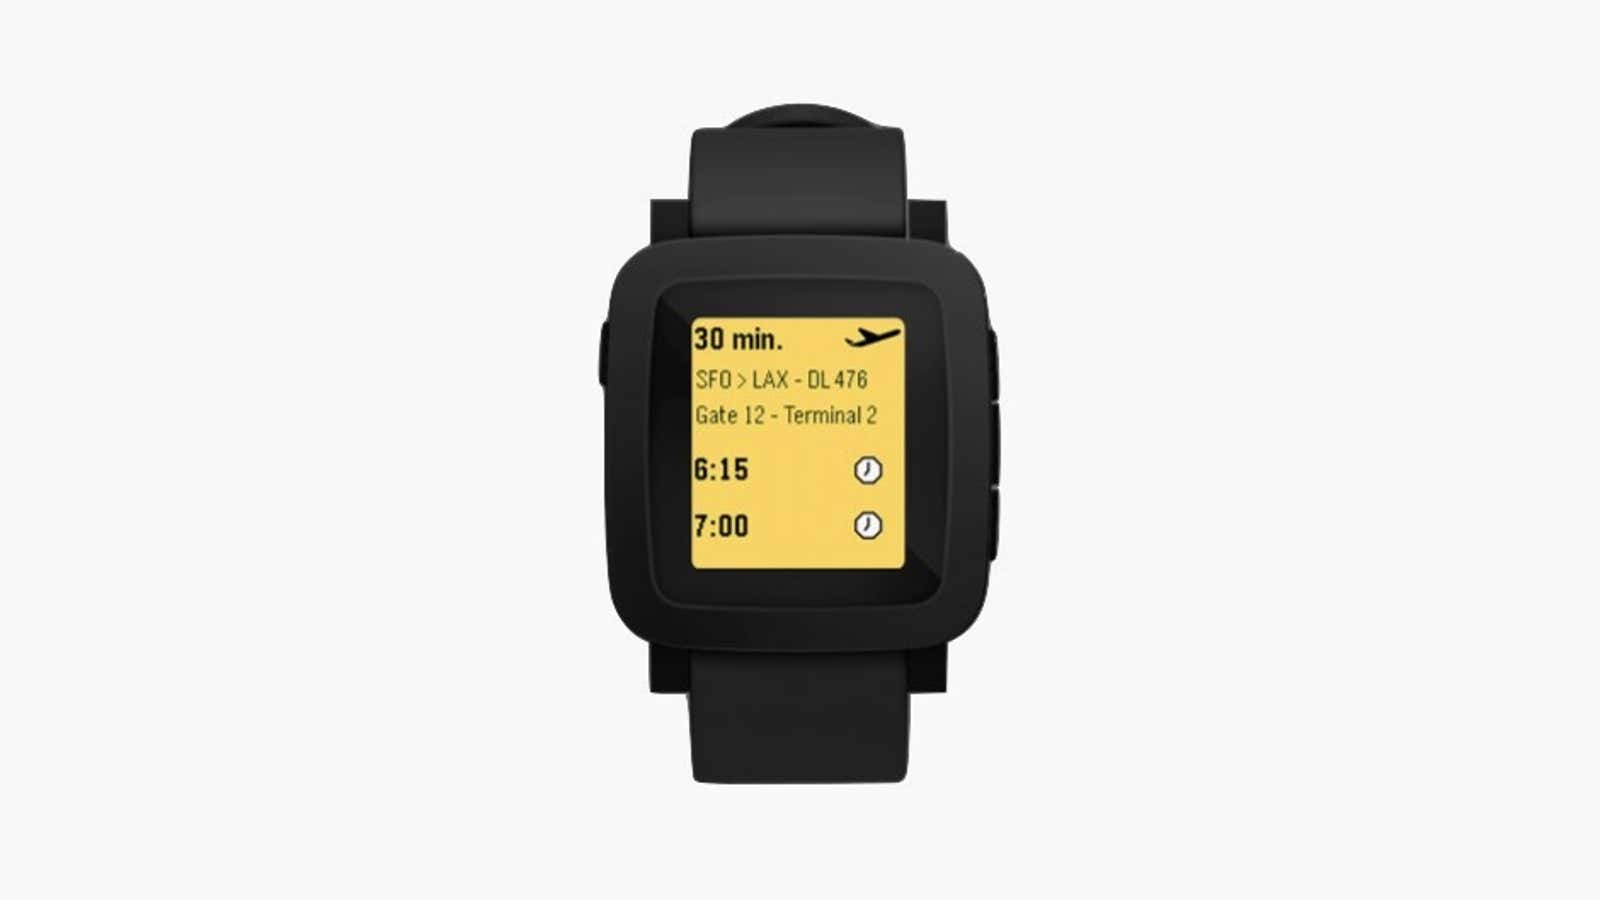 The new Pebble. (Allegedly.)